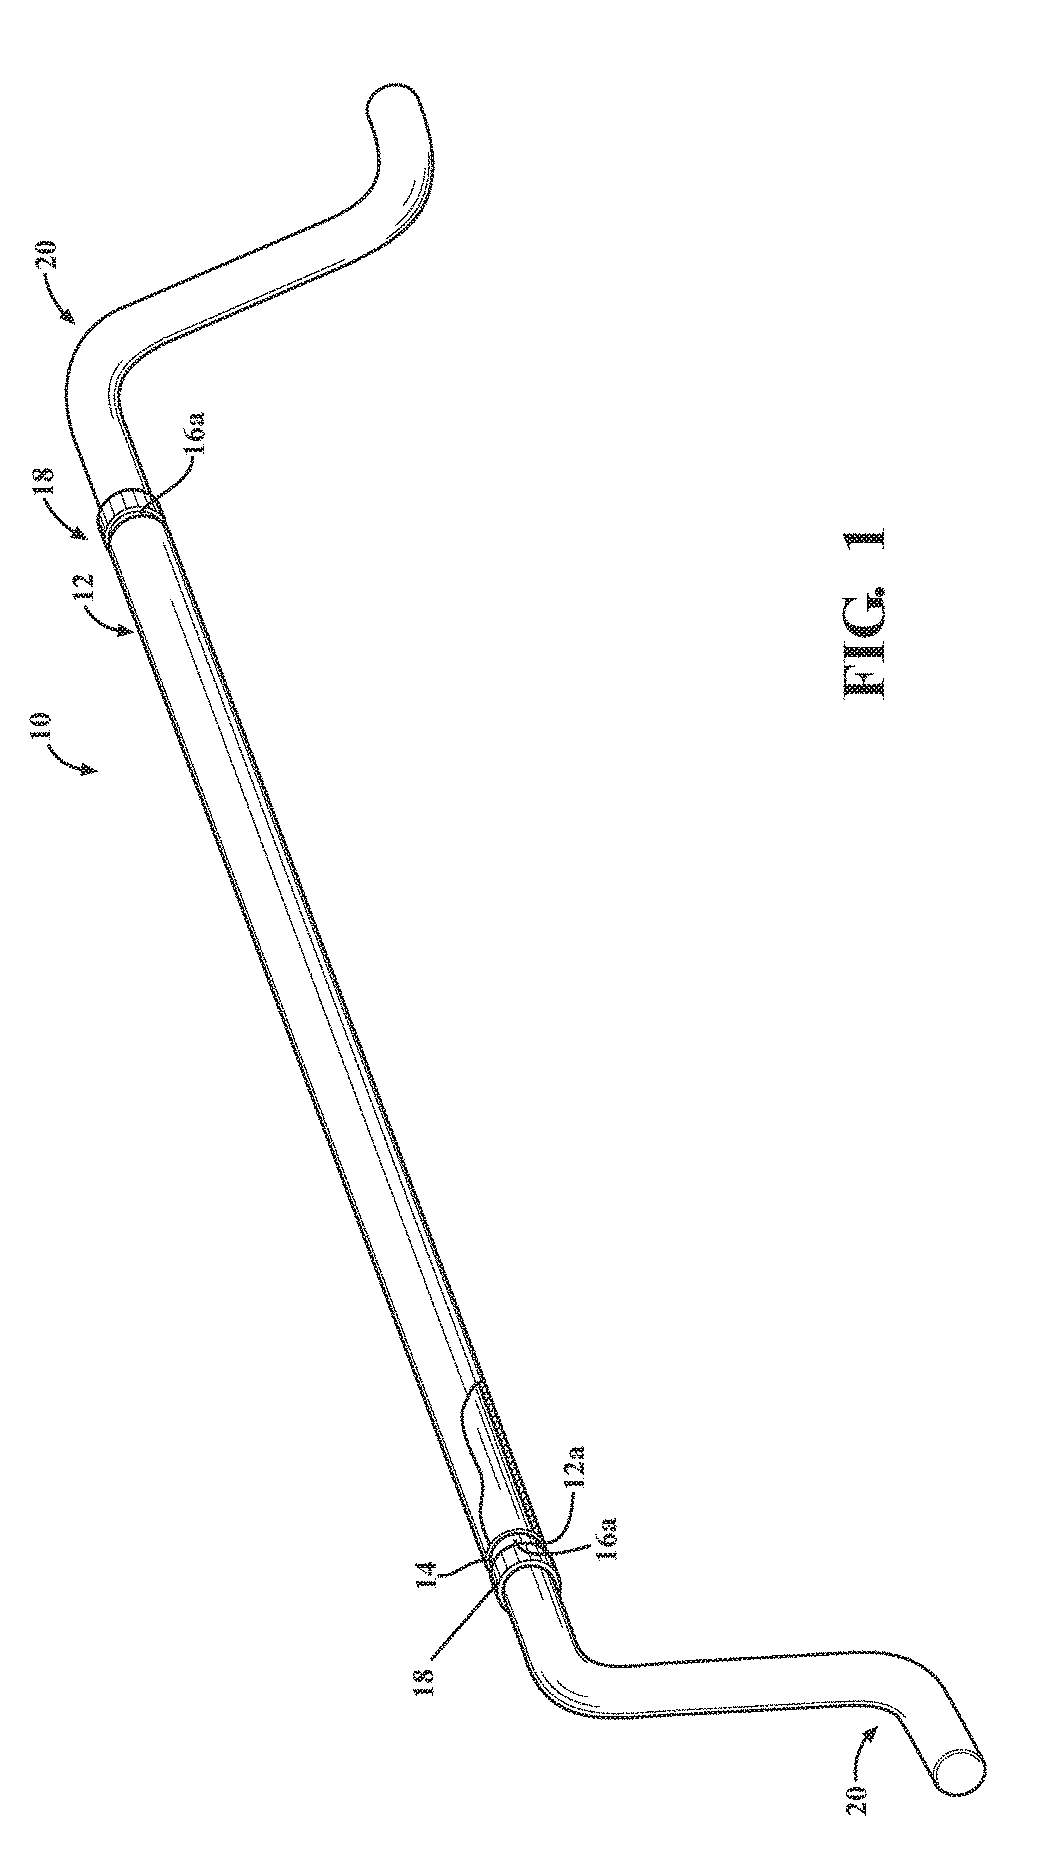 Exercise equipment and method of exercising utilizing a pulse generation